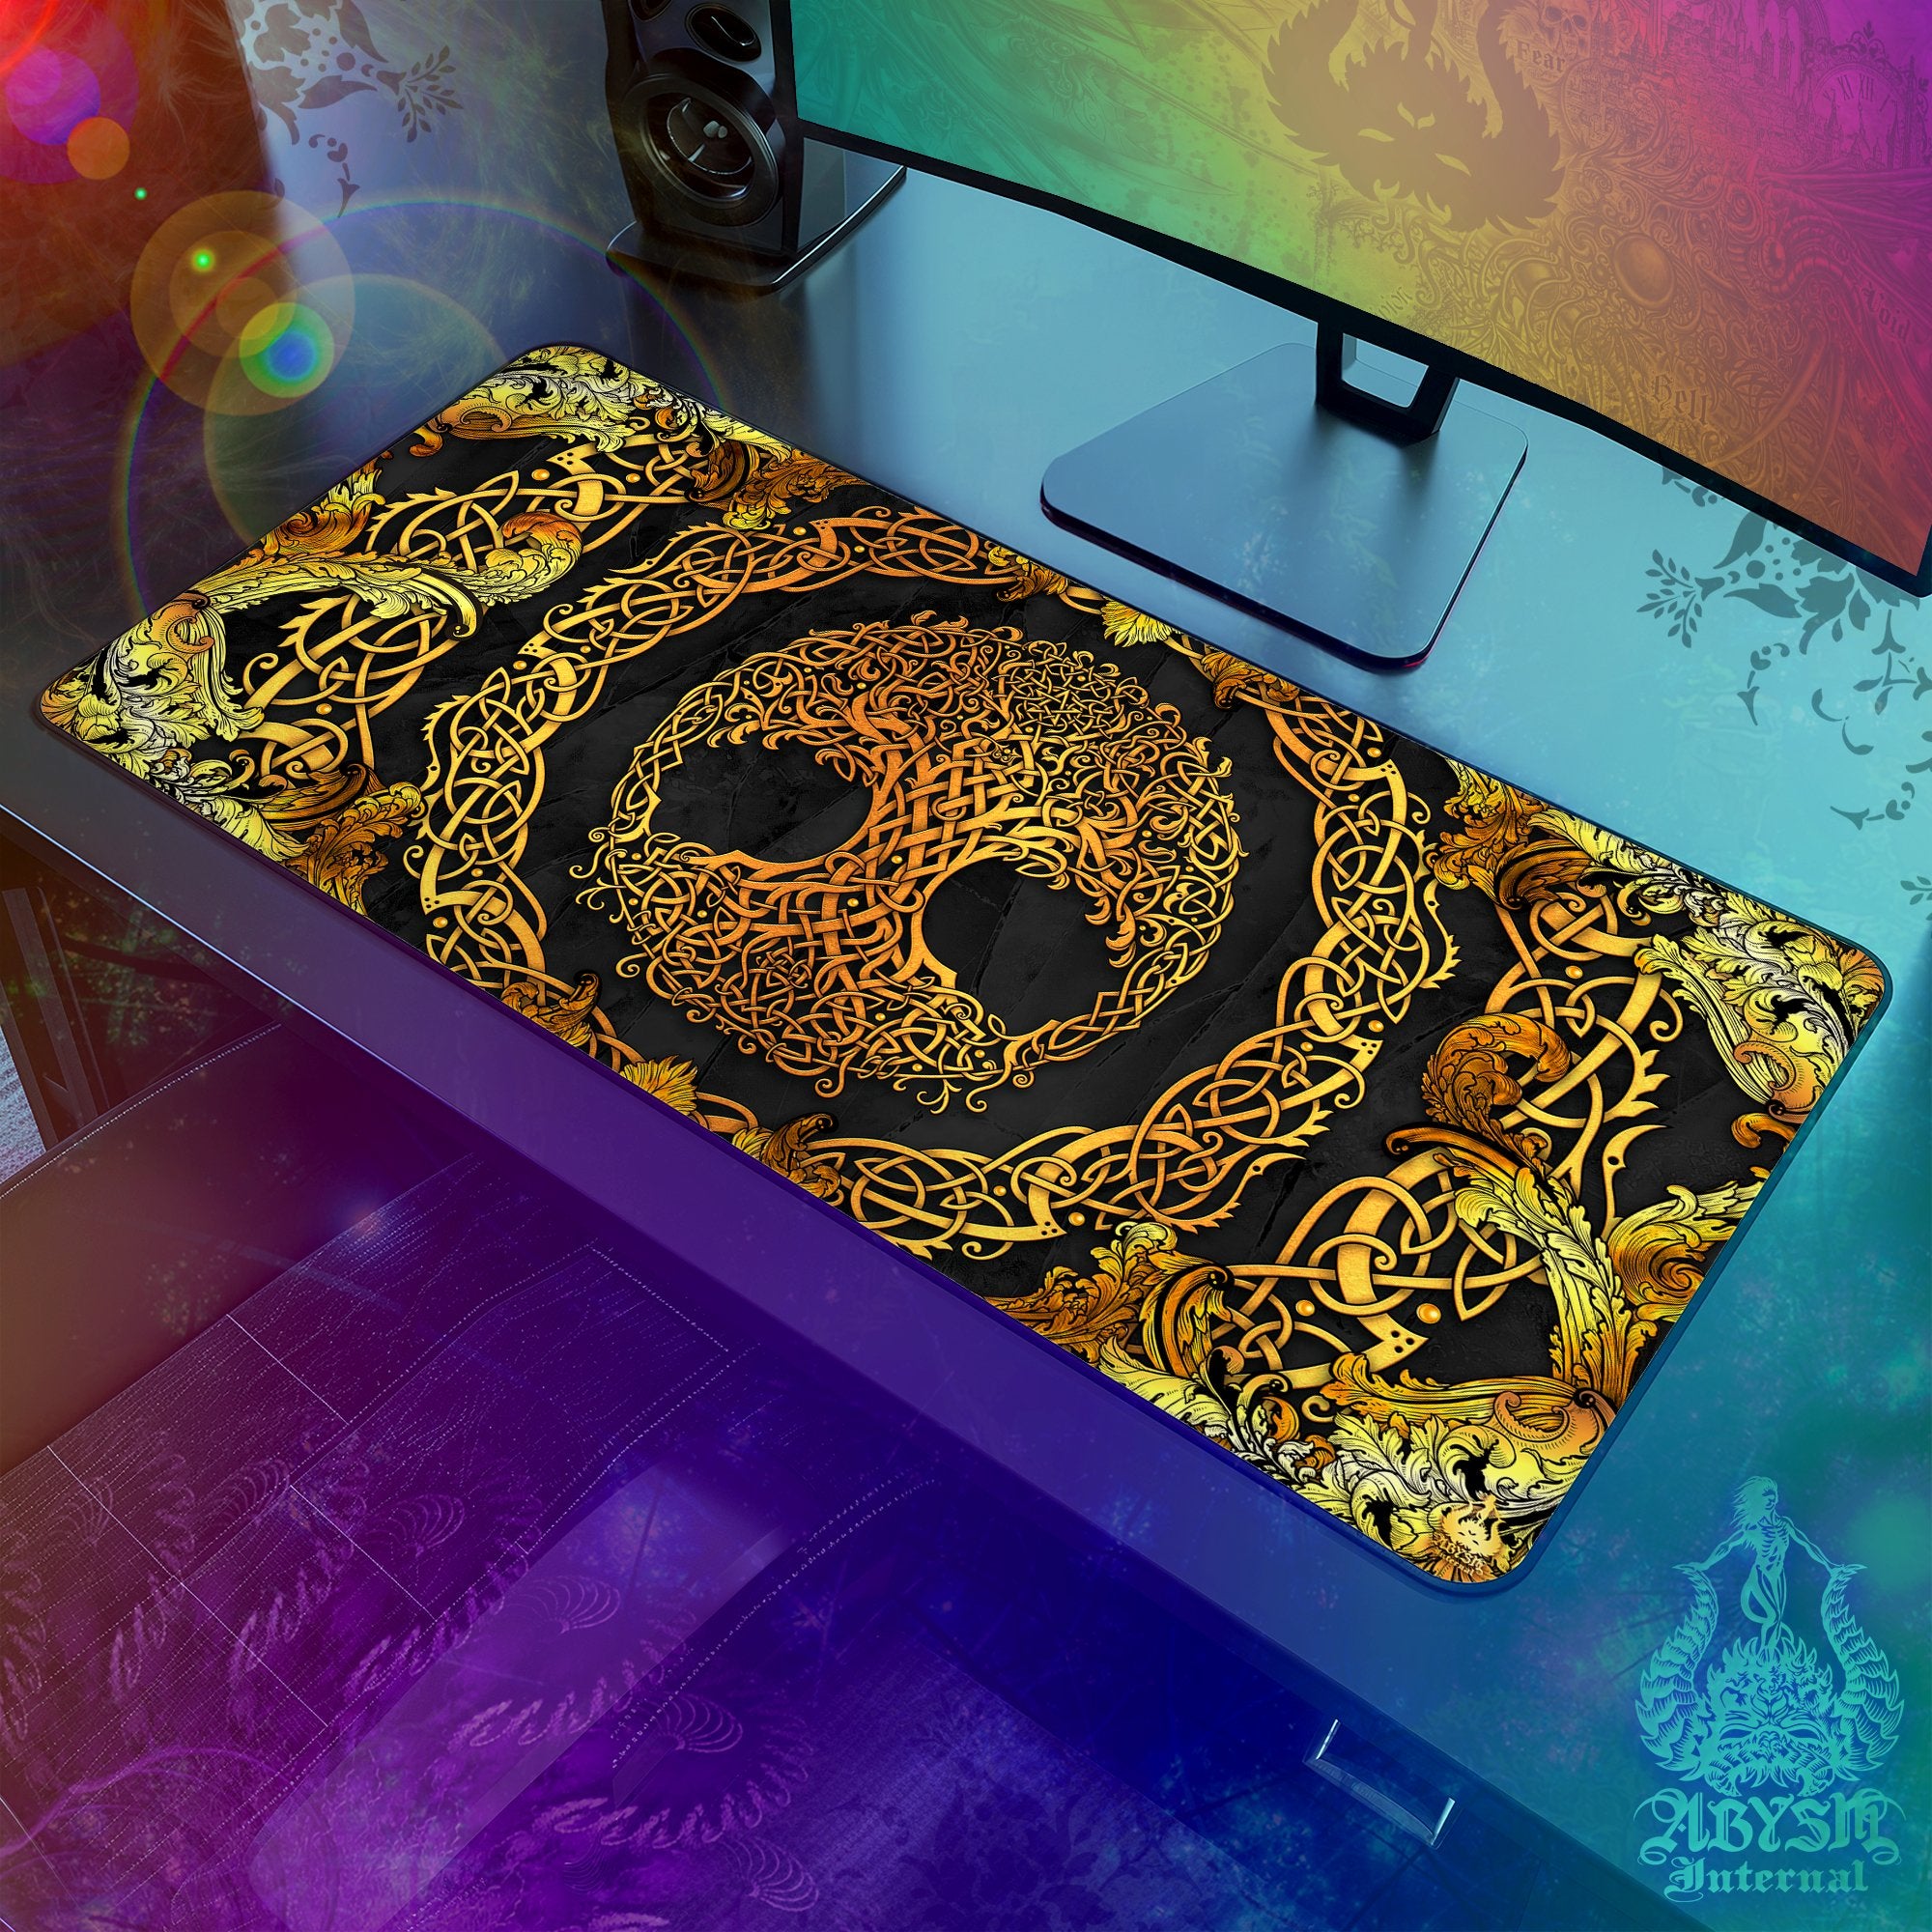 Gold Tree of Life Mouse Pad, Celtic Knotwork Gaming Desk Mat, Wicca Workpad, Indie Table Protector Cover, Art Print - 3 Colors - Abysm Internal